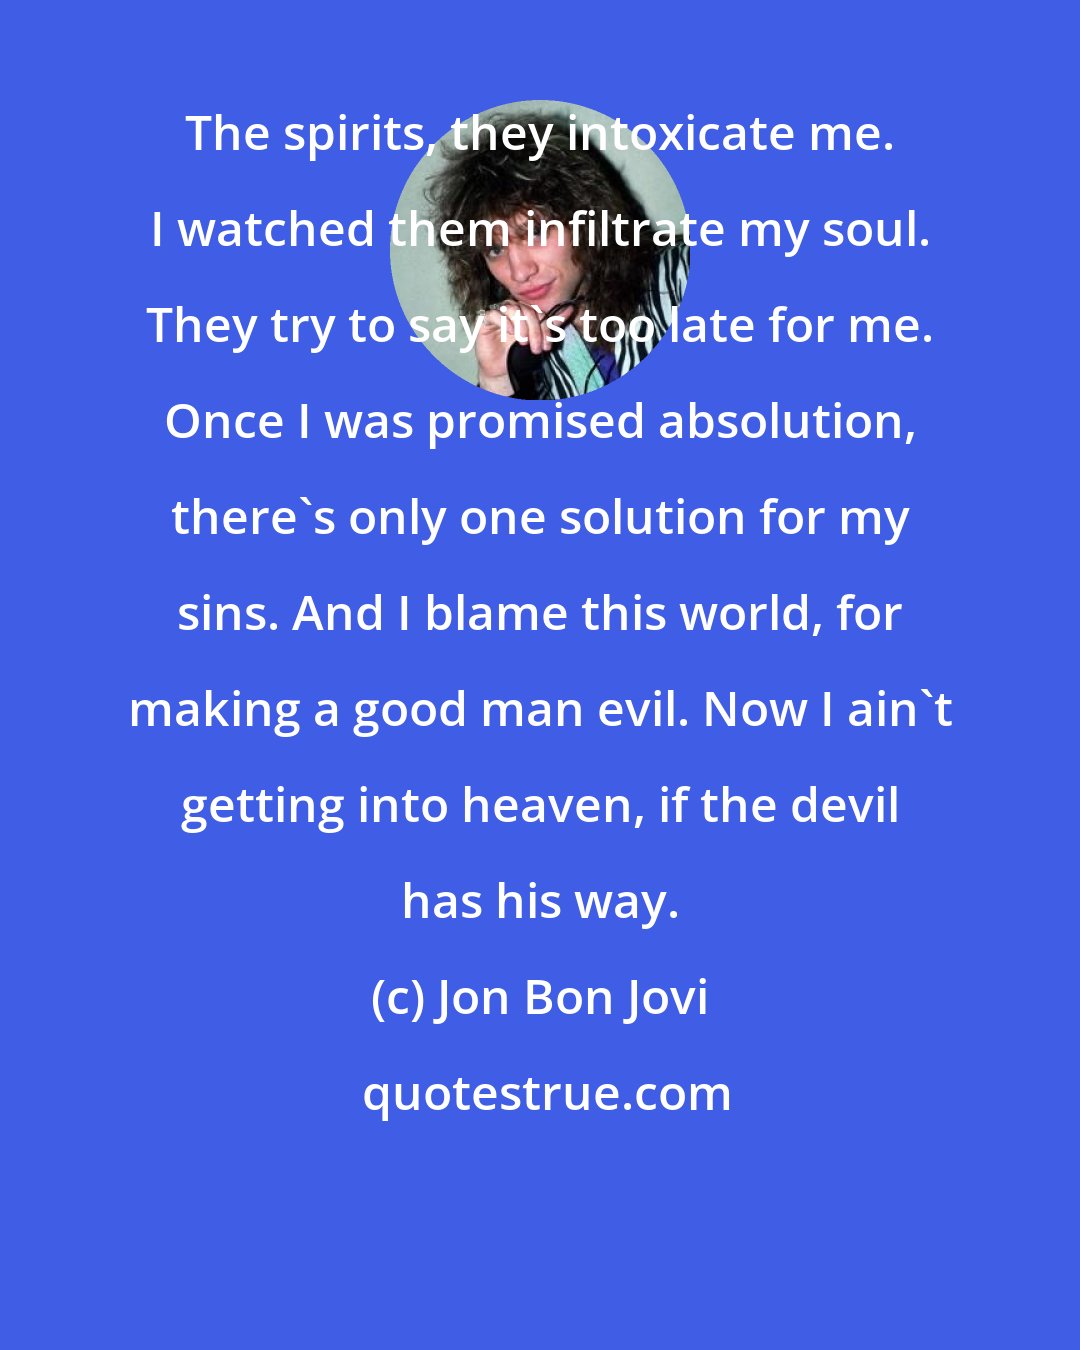 Jon Bon Jovi: The spirits, they intoxicate me. I watched them infiltrate my soul. They try to say it's too late for me. Once I was promised absolution, there's only one solution for my sins. And I blame this world, for making a good man evil. Now I ain't getting into heaven, if the devil has his way.